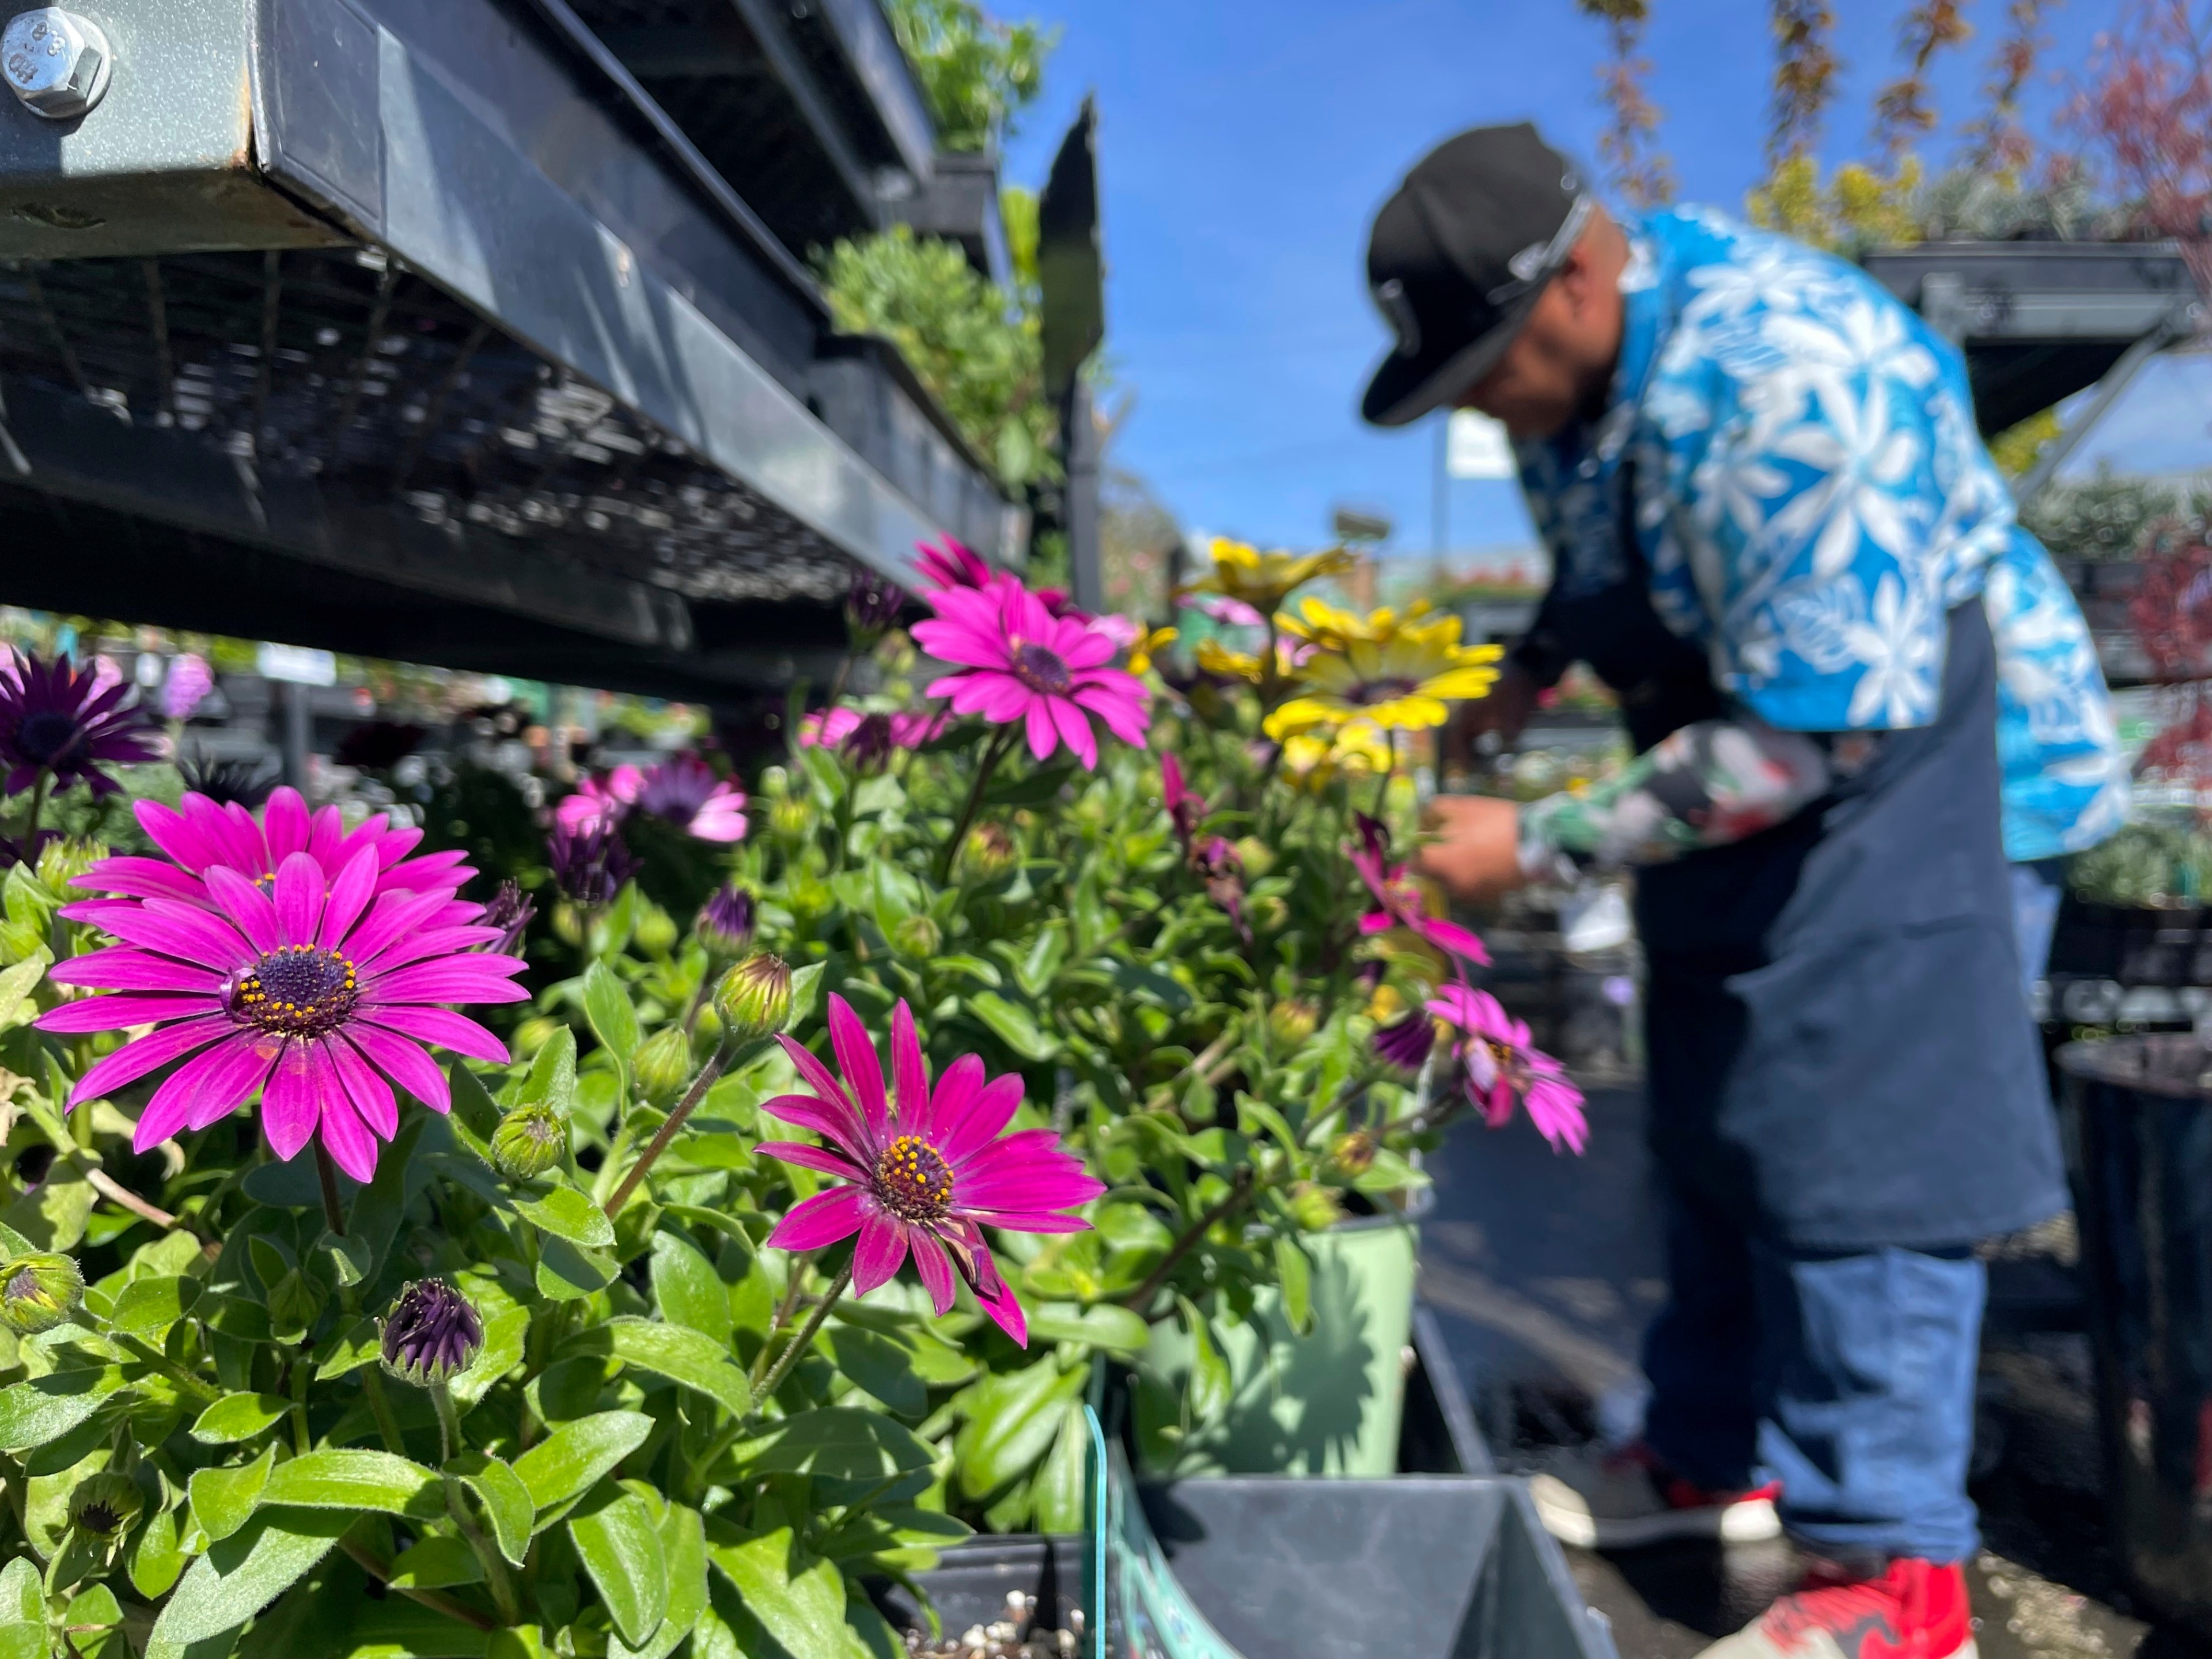 A plant store employee tends to plants outdoors